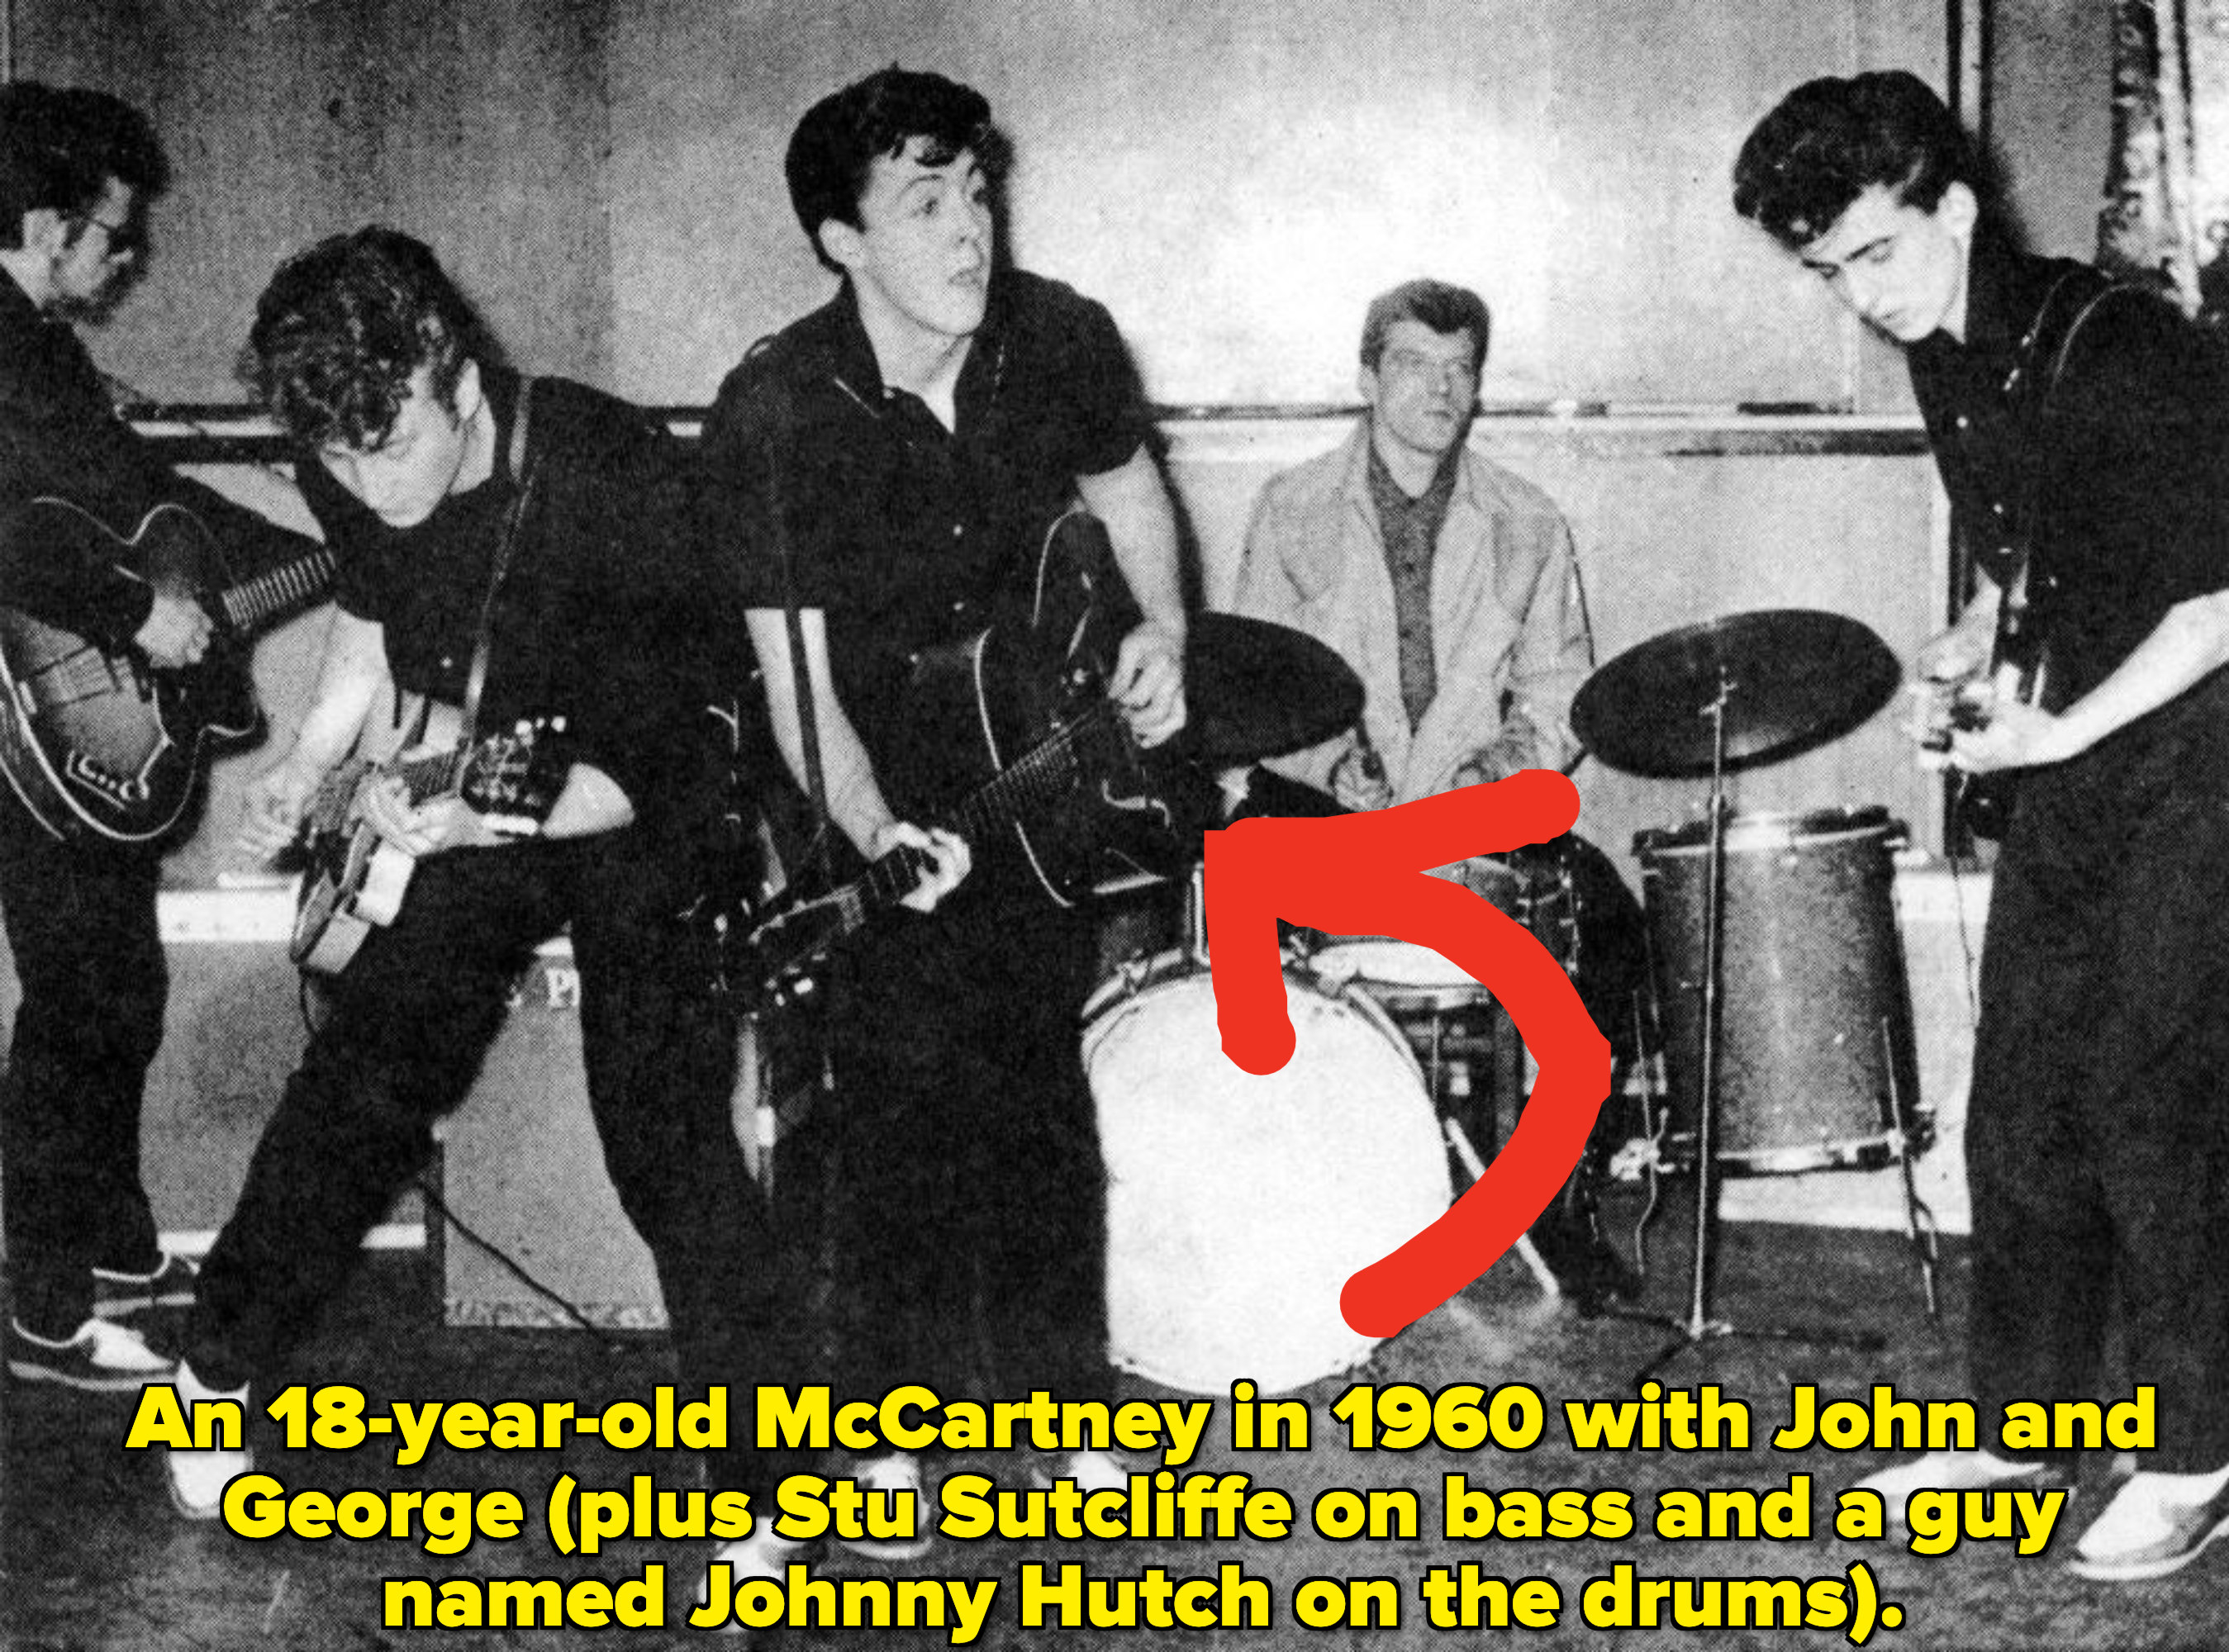 An 18-year-old McCartney in 1960 with John and George (plus Stu Sutcliffe on bass and a guy named Johnny Hutch on the drums)